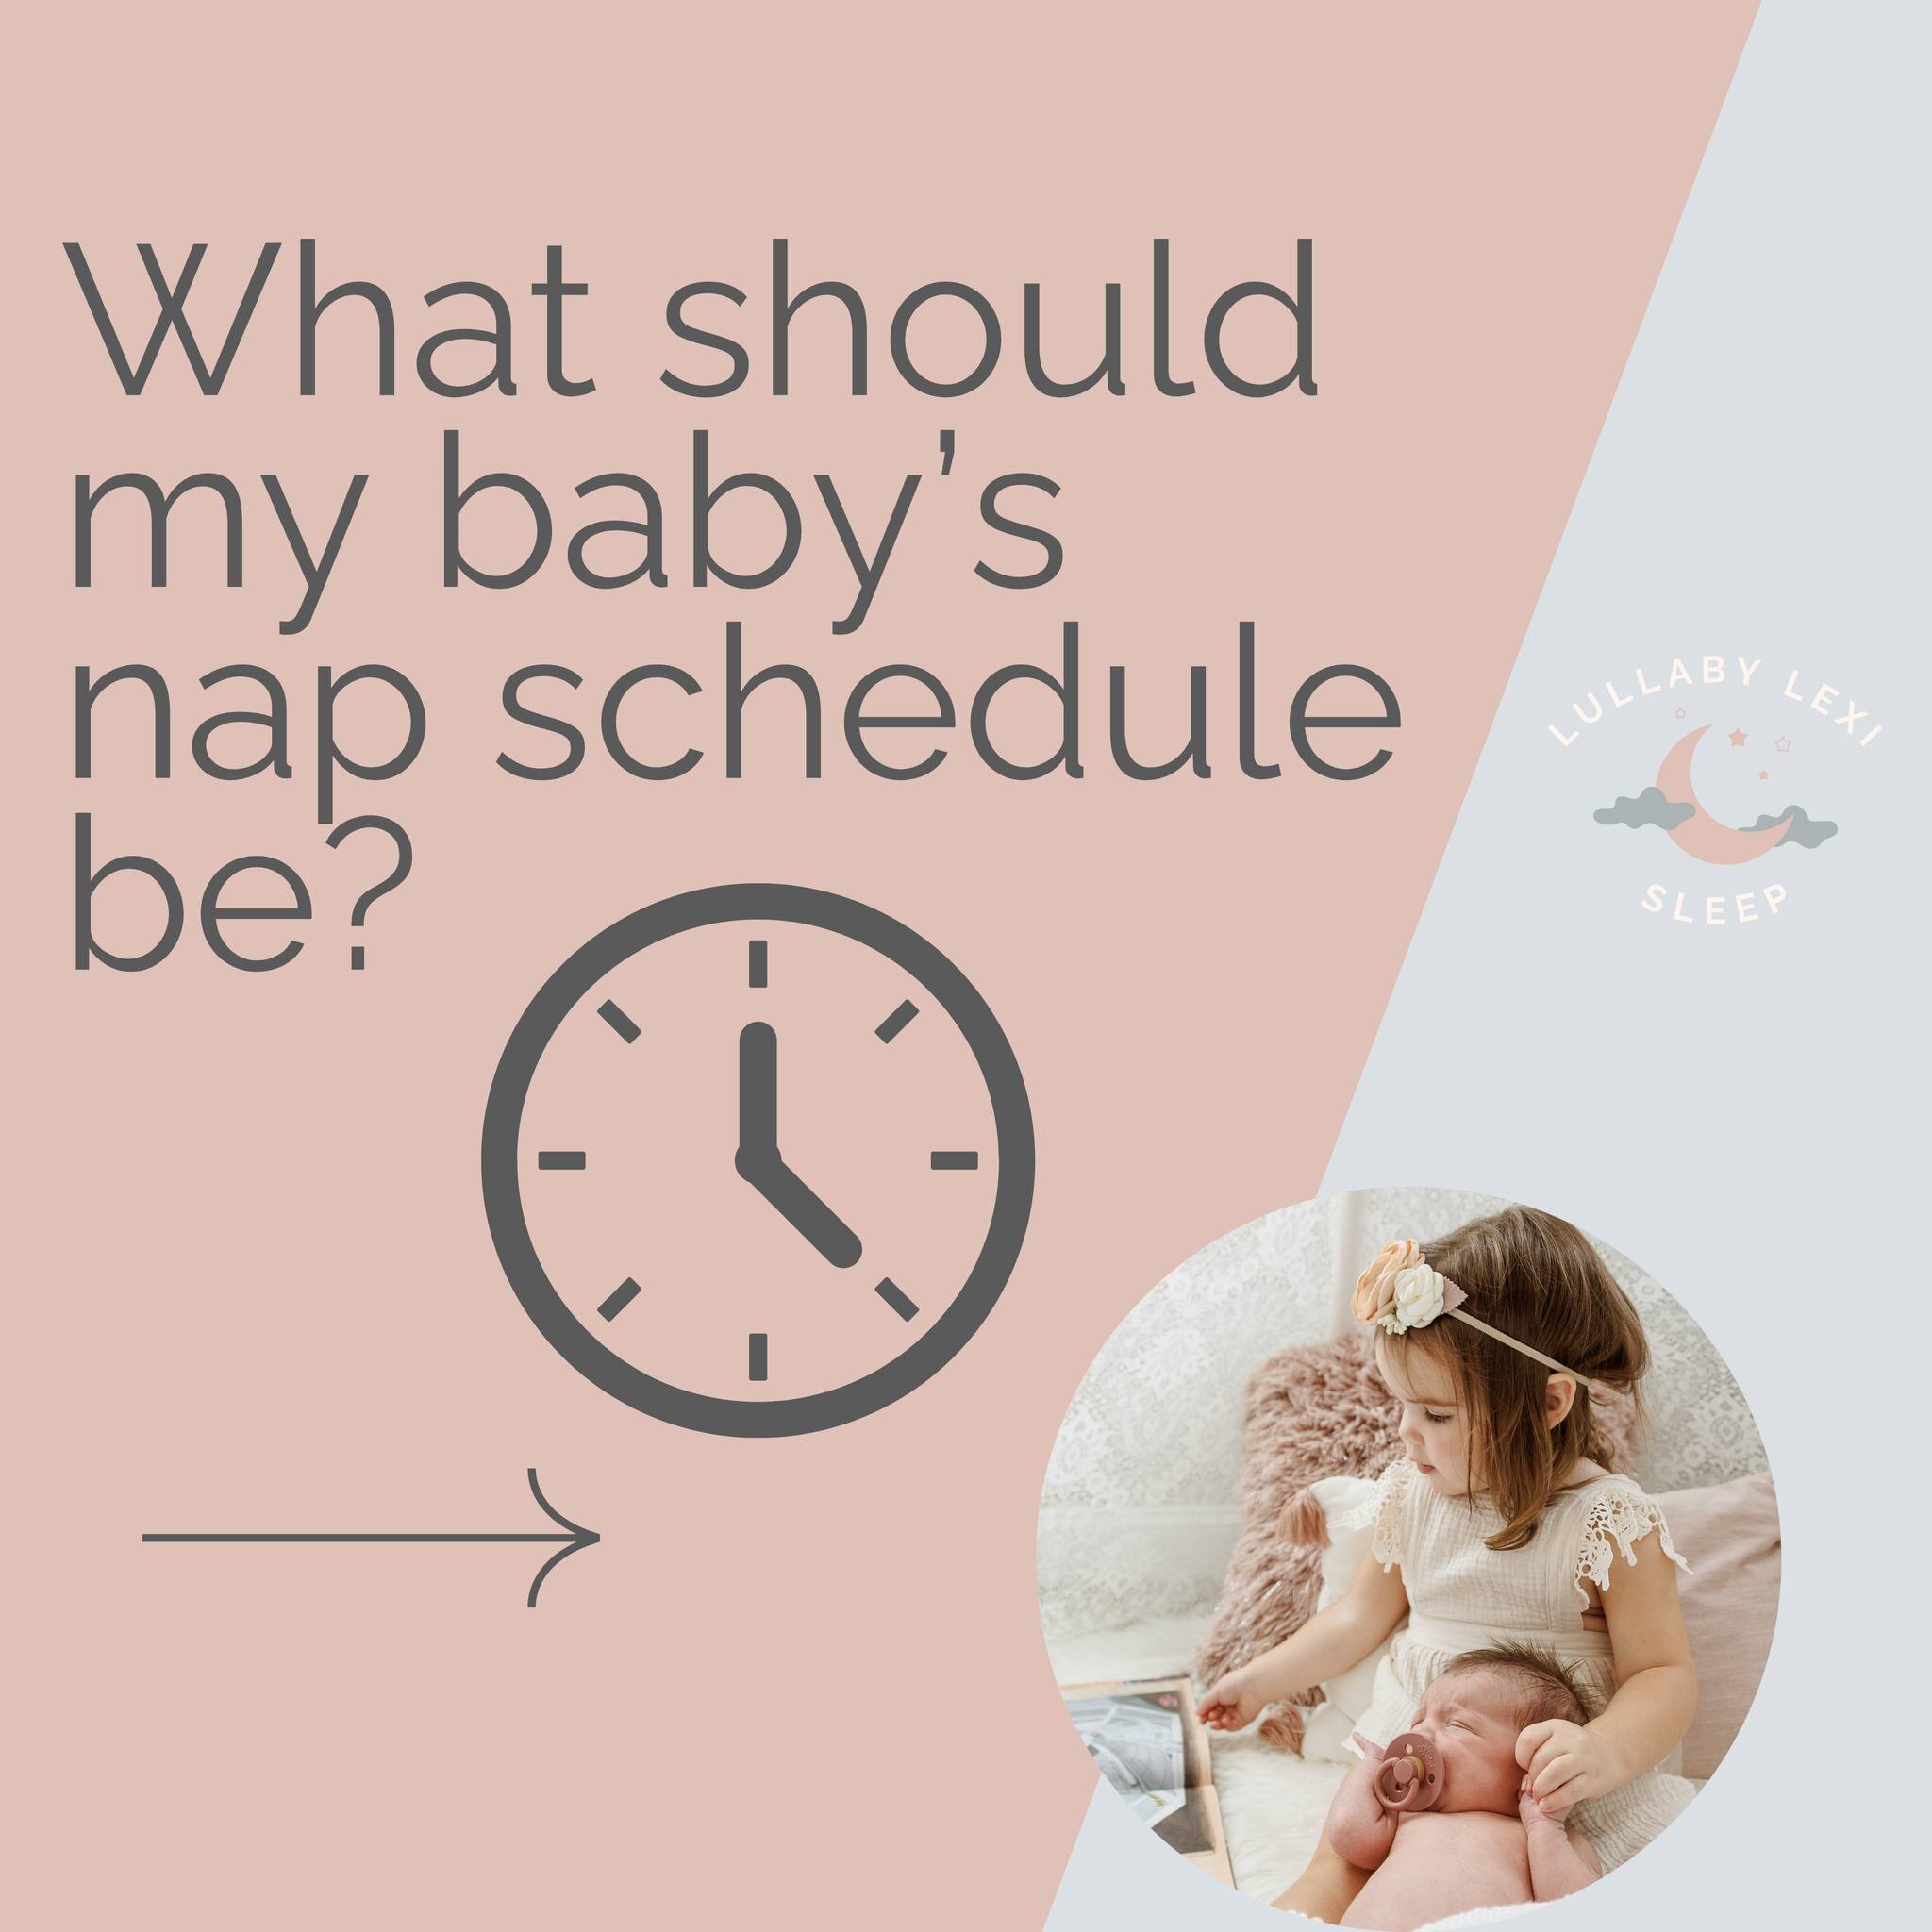 Wondering what your baby's nap schedule should be?⏰💤

First off, theres never a one size fits all. These sample schedules should just be a starting point but may need some trial and error. 

There are recommended wake windows to follow but these are